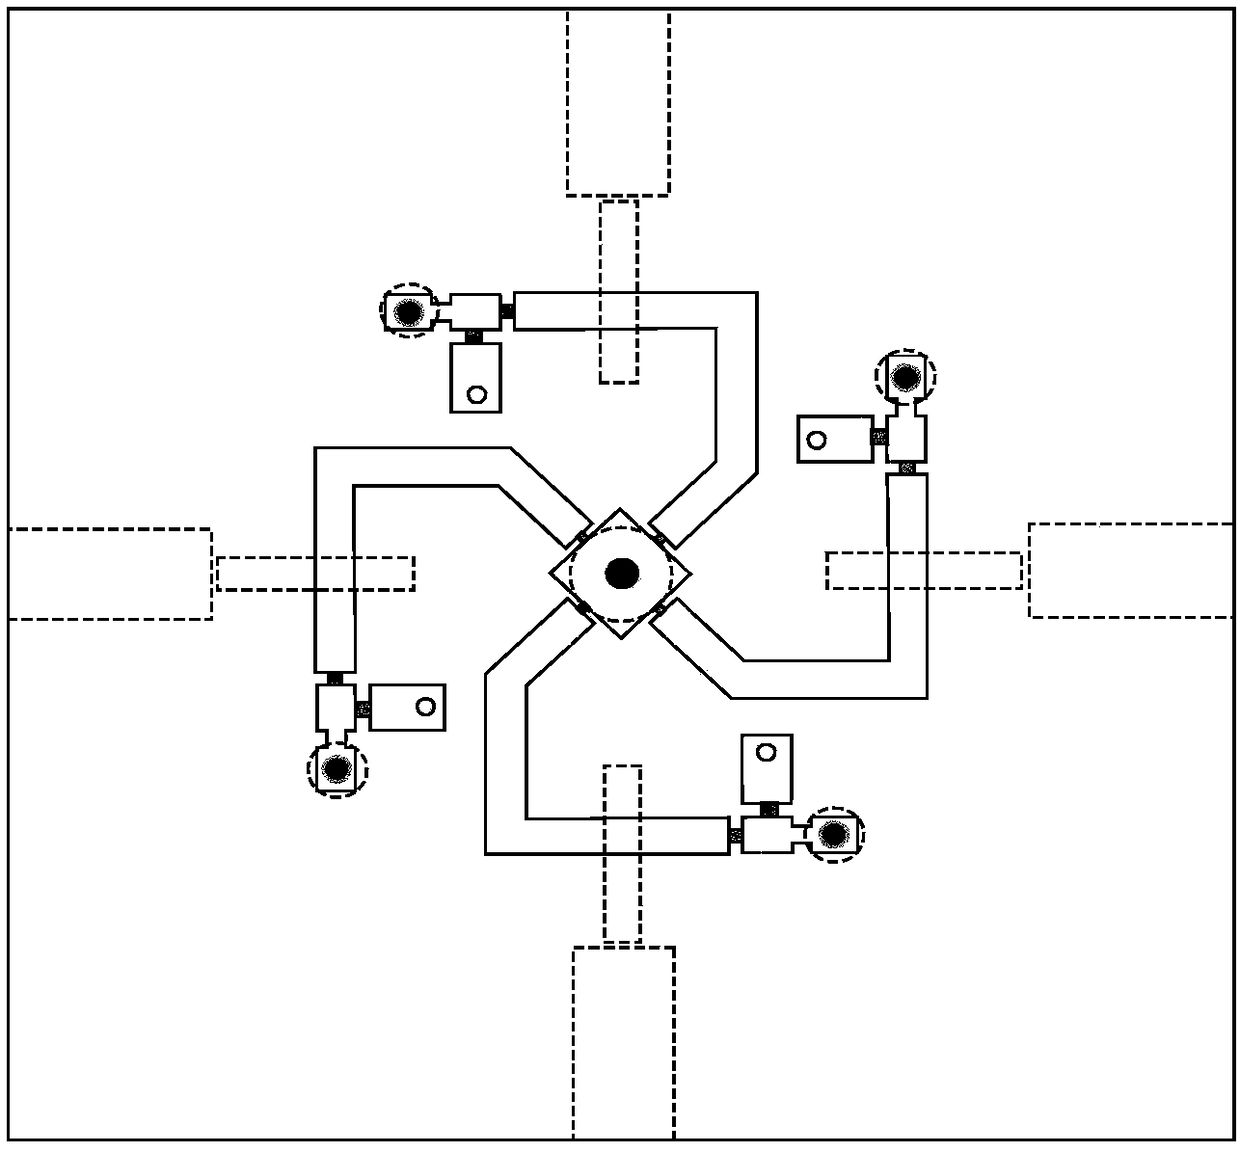 Microstrip slot antenna with reconfigurable directional diagrams